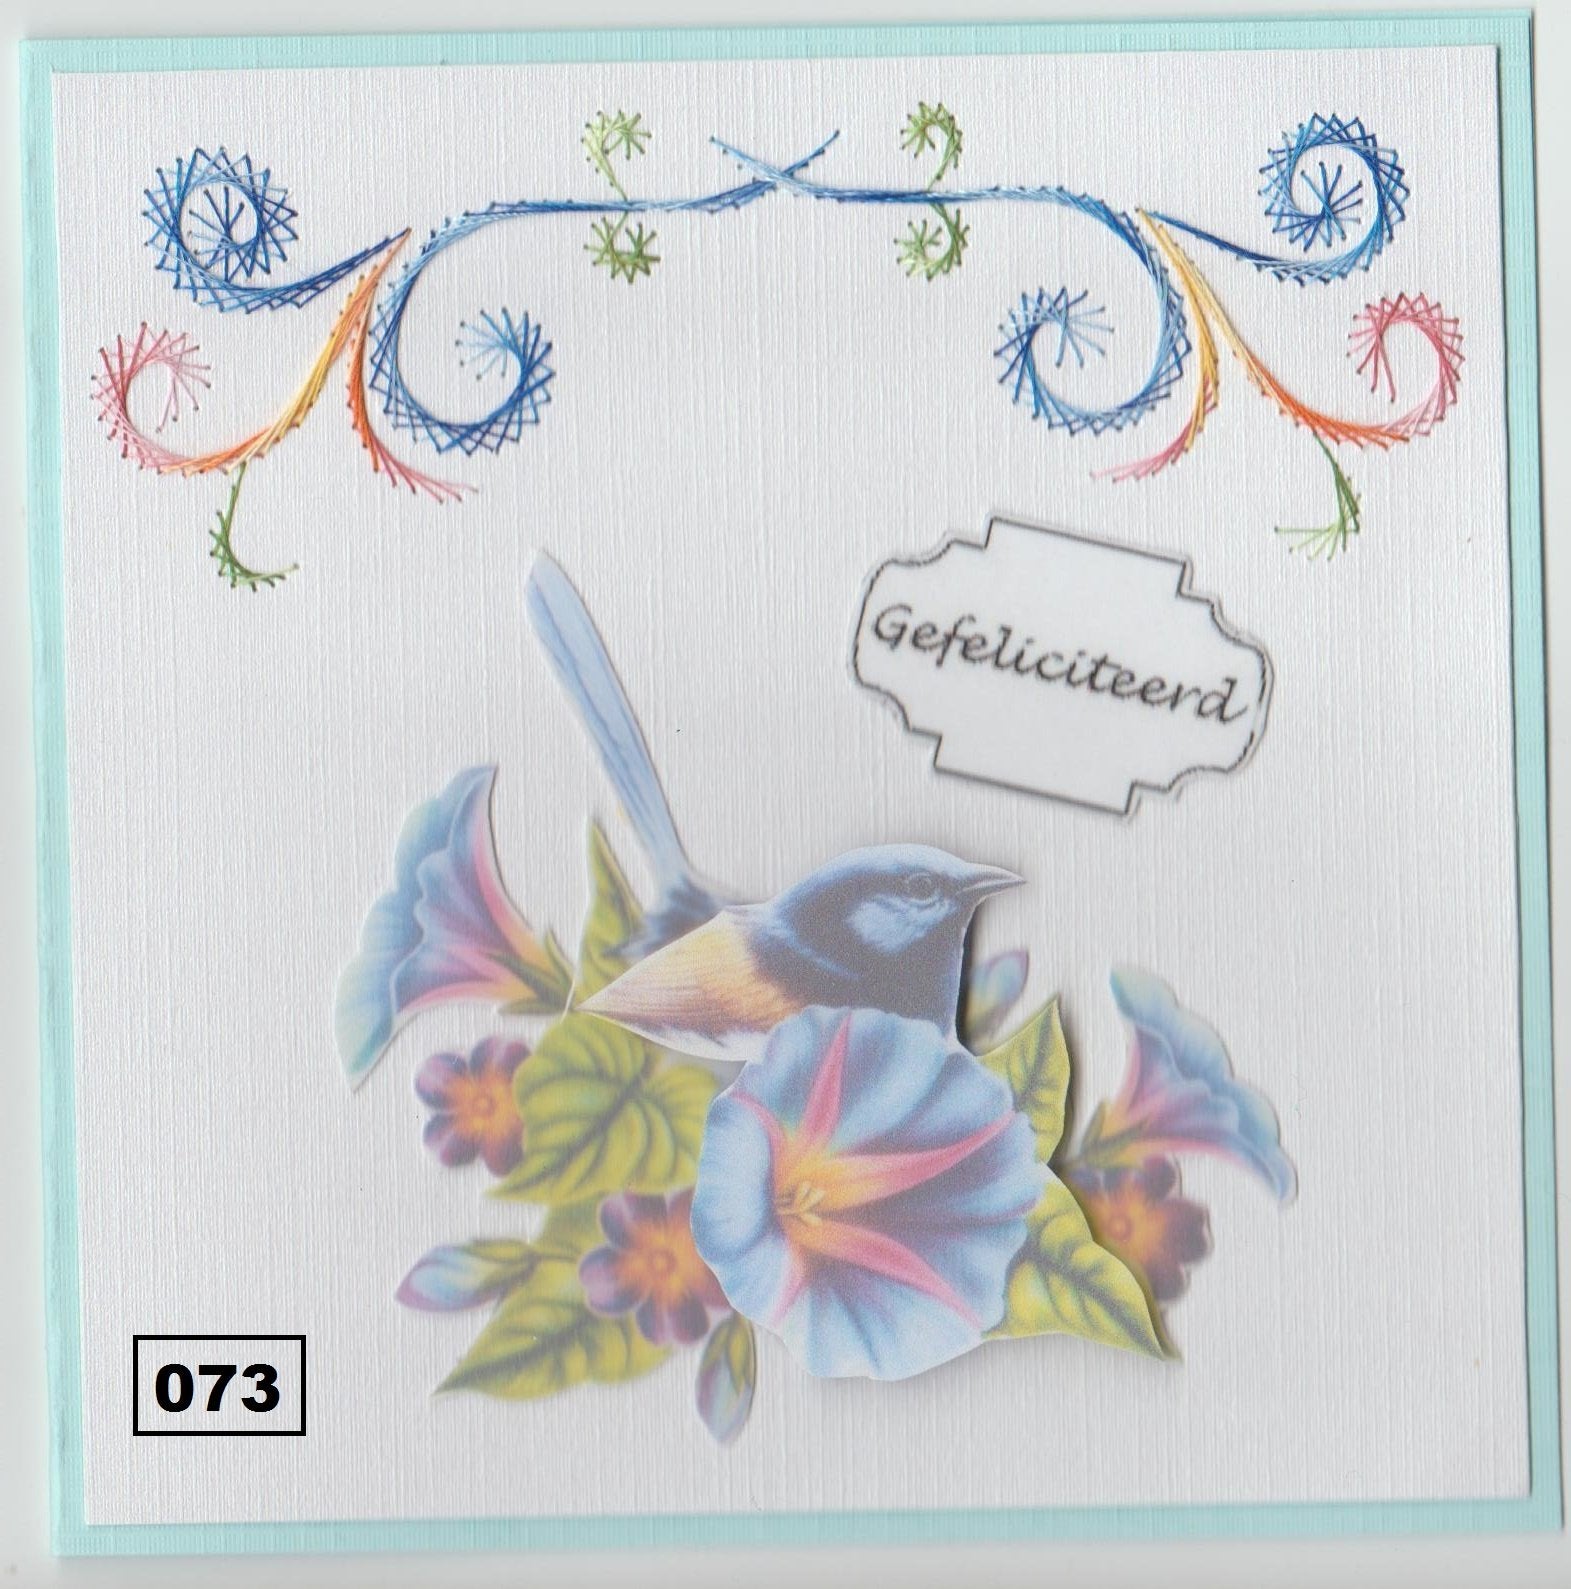 Laura's Design Digital Embroidery Pattern - Swooping Border